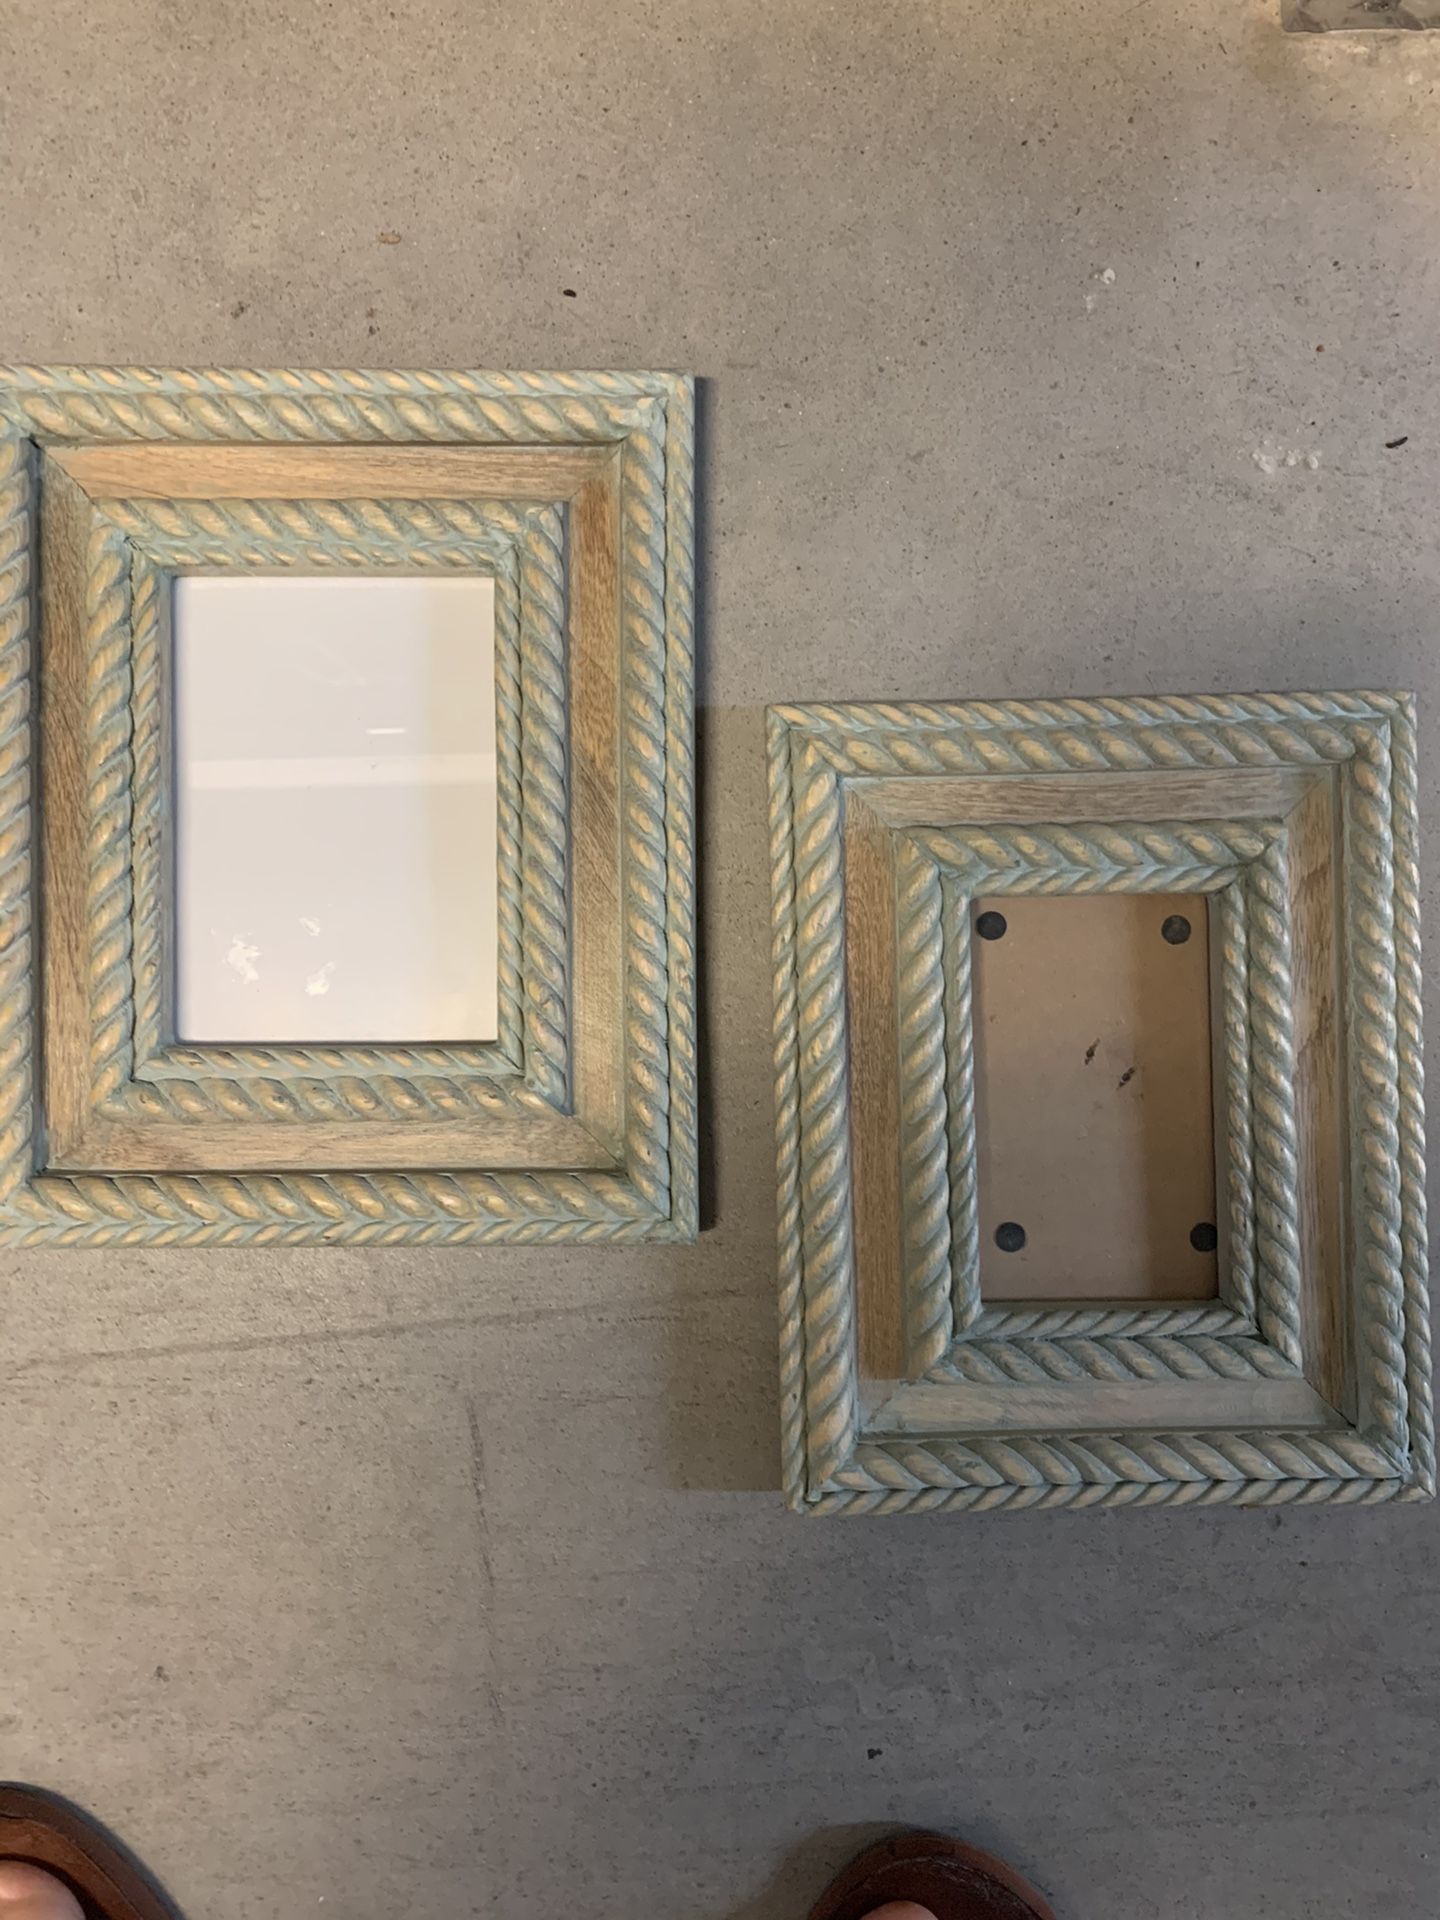 Rustic wooden photo frames